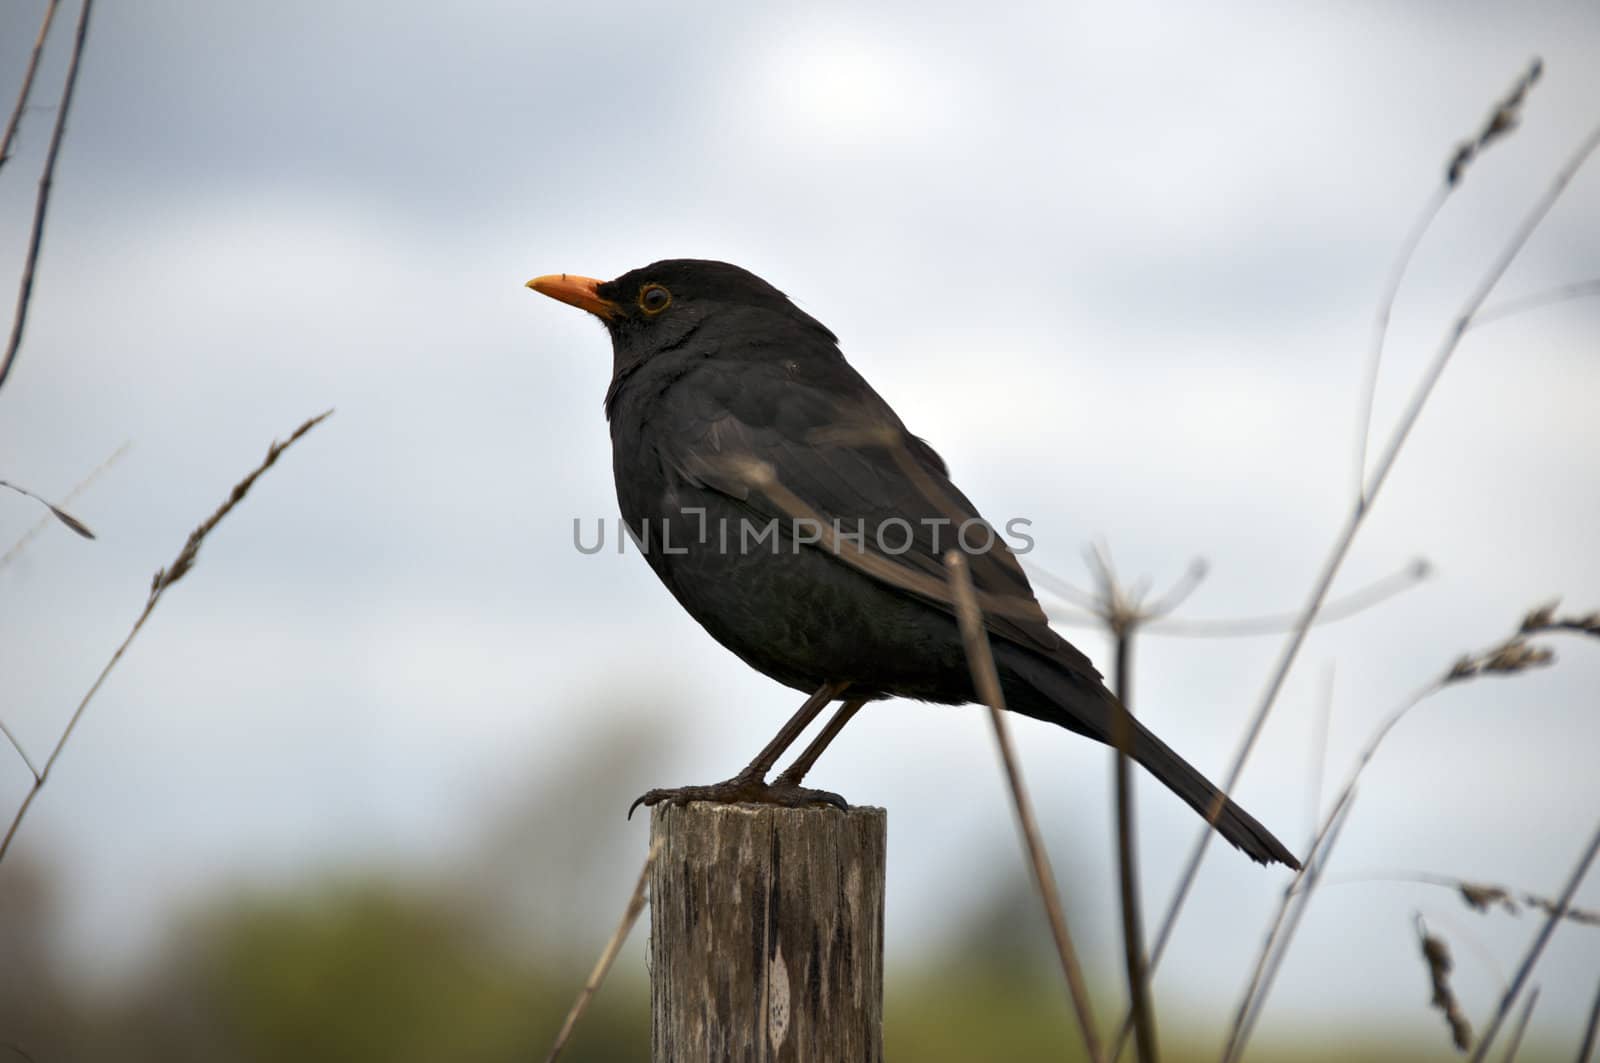 A bird sitting on afence post with a cloudy sky in the background